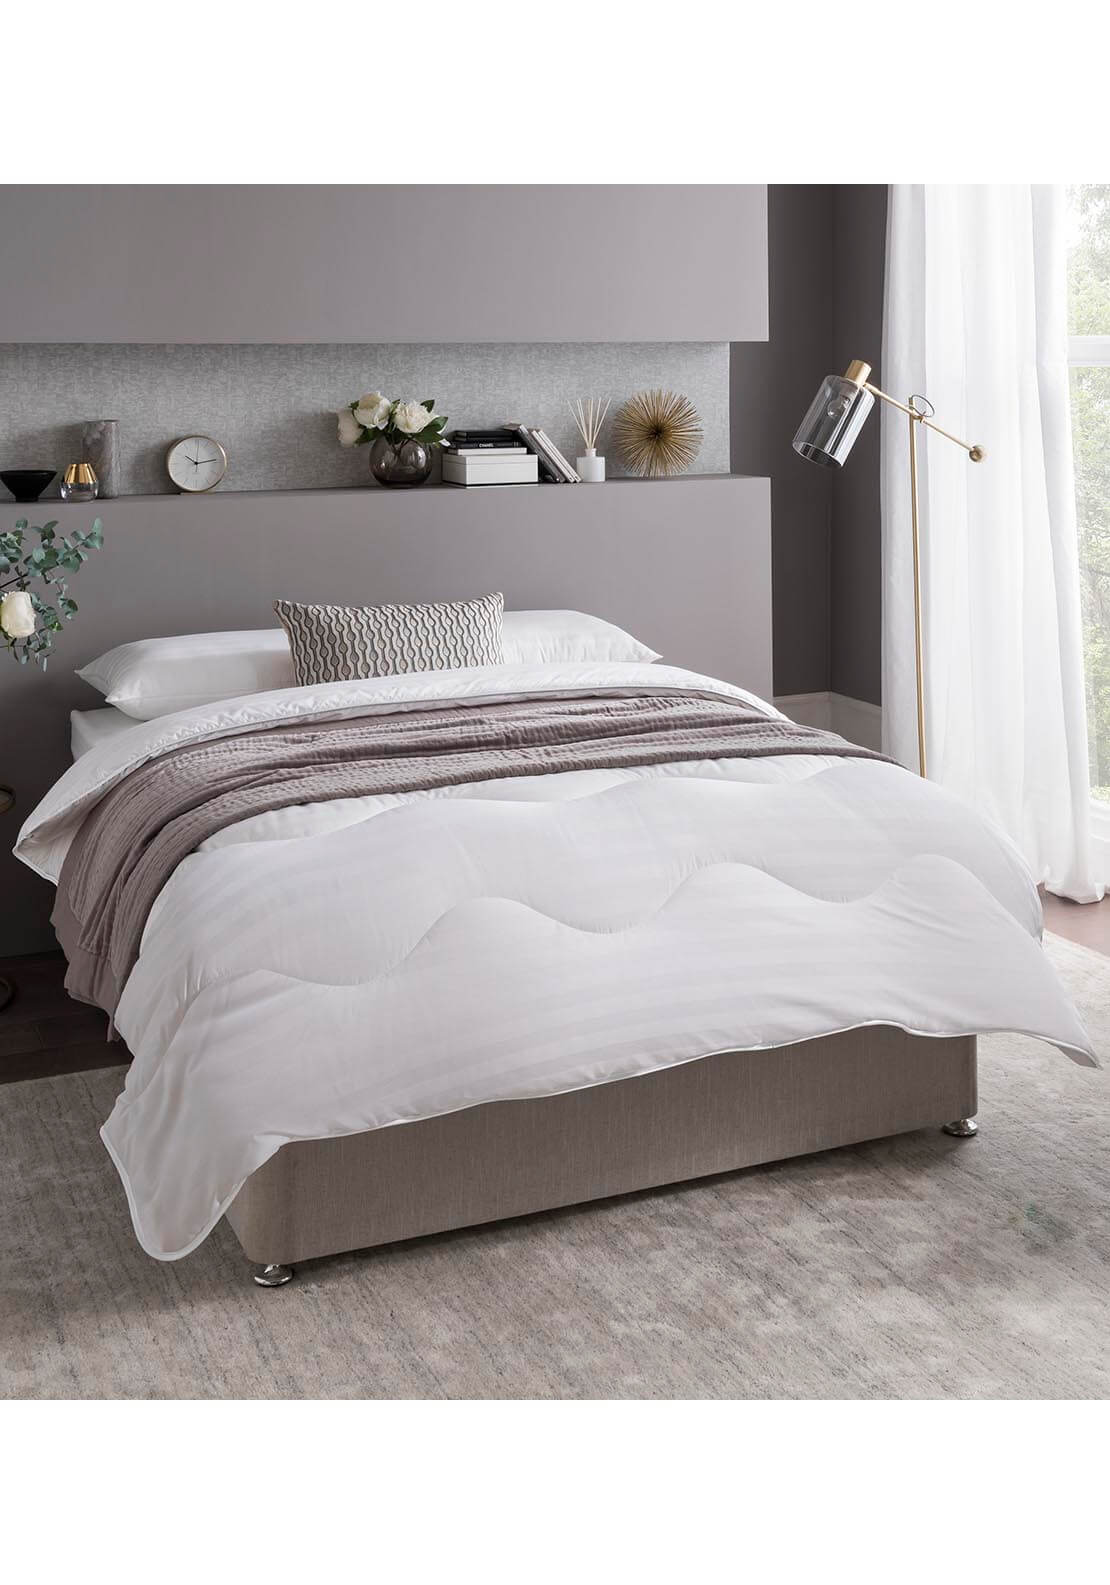 The Fine Bedding Company Boutique Silk Duvet 10.5 Tog Super King 1 Shaws Department Stores